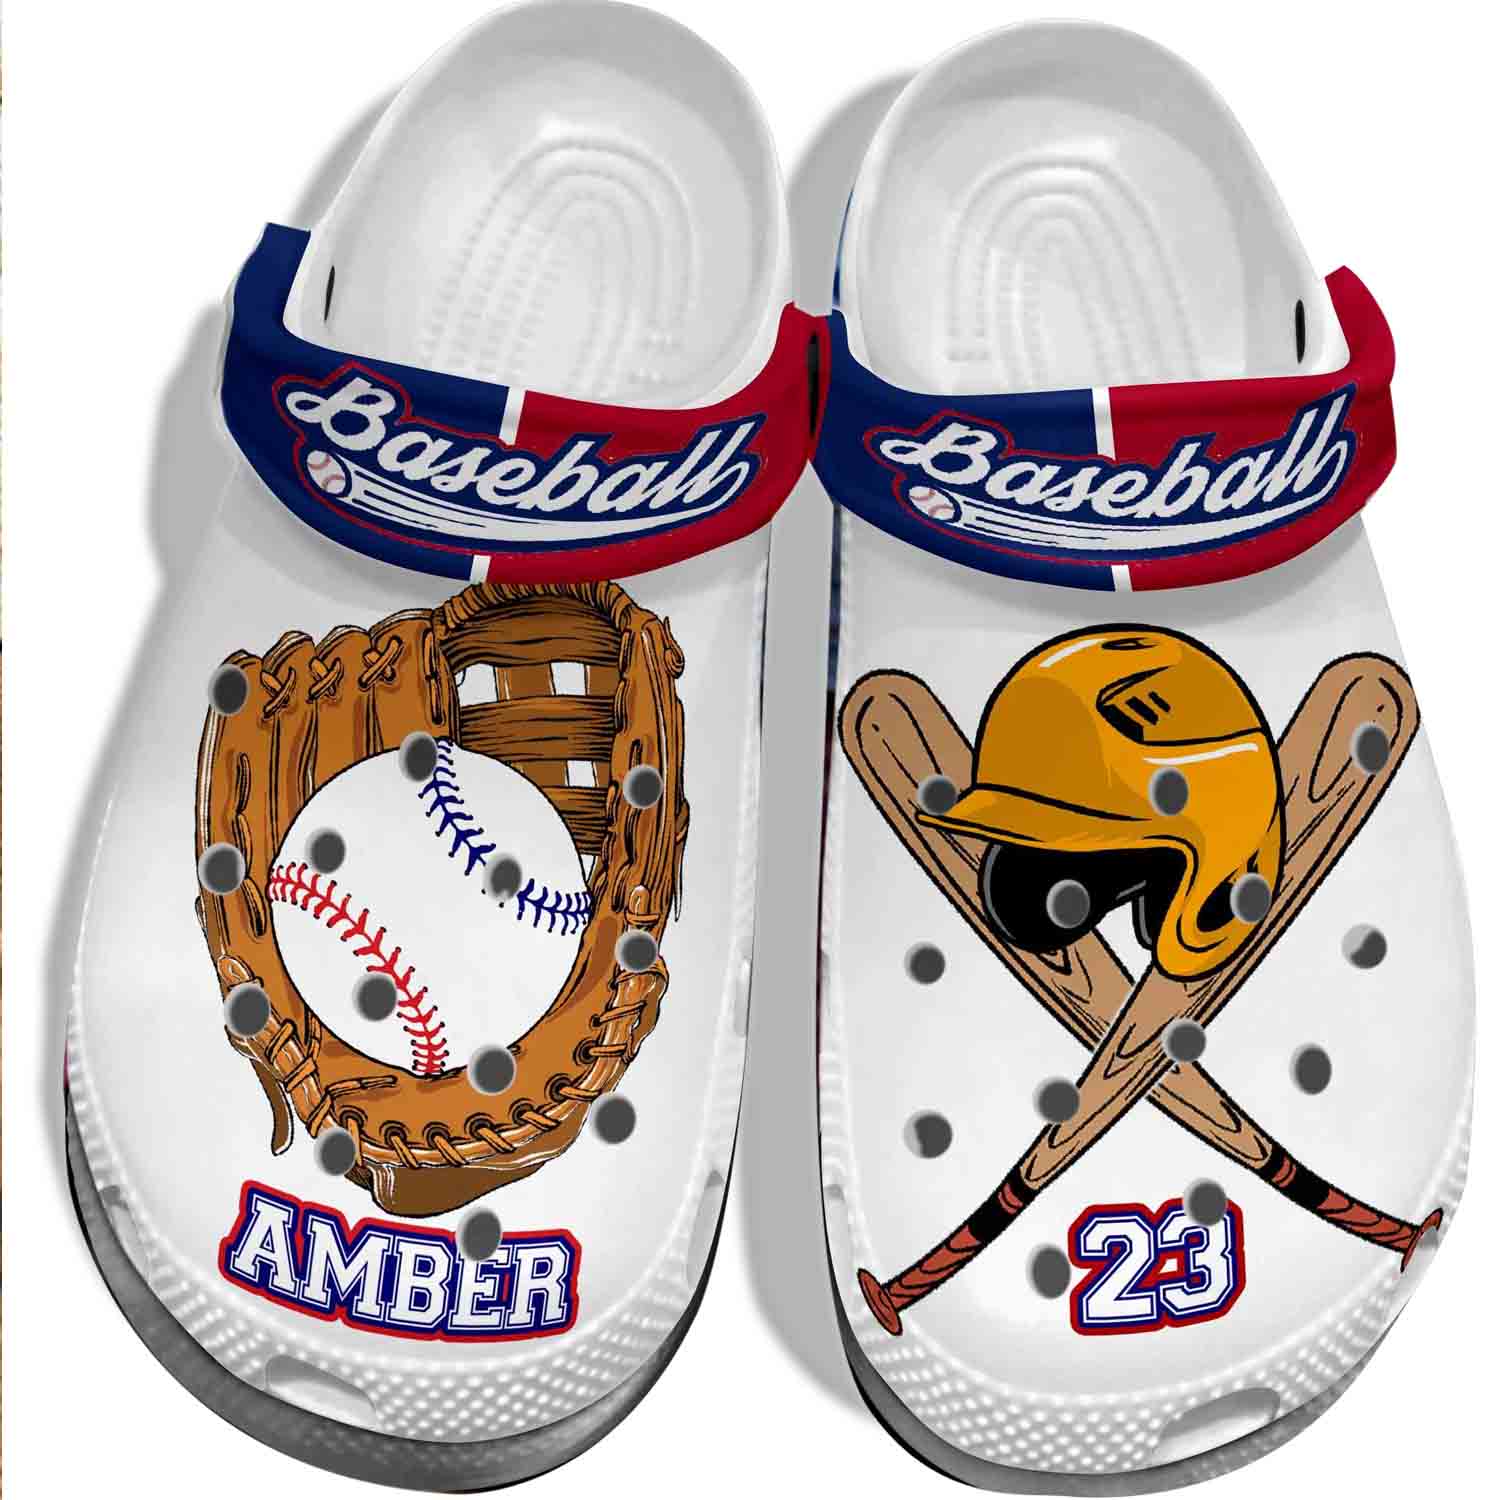 Player Baseball Equipment Crocss Can Customize Name Number Birthday Gifts For Son Daughter